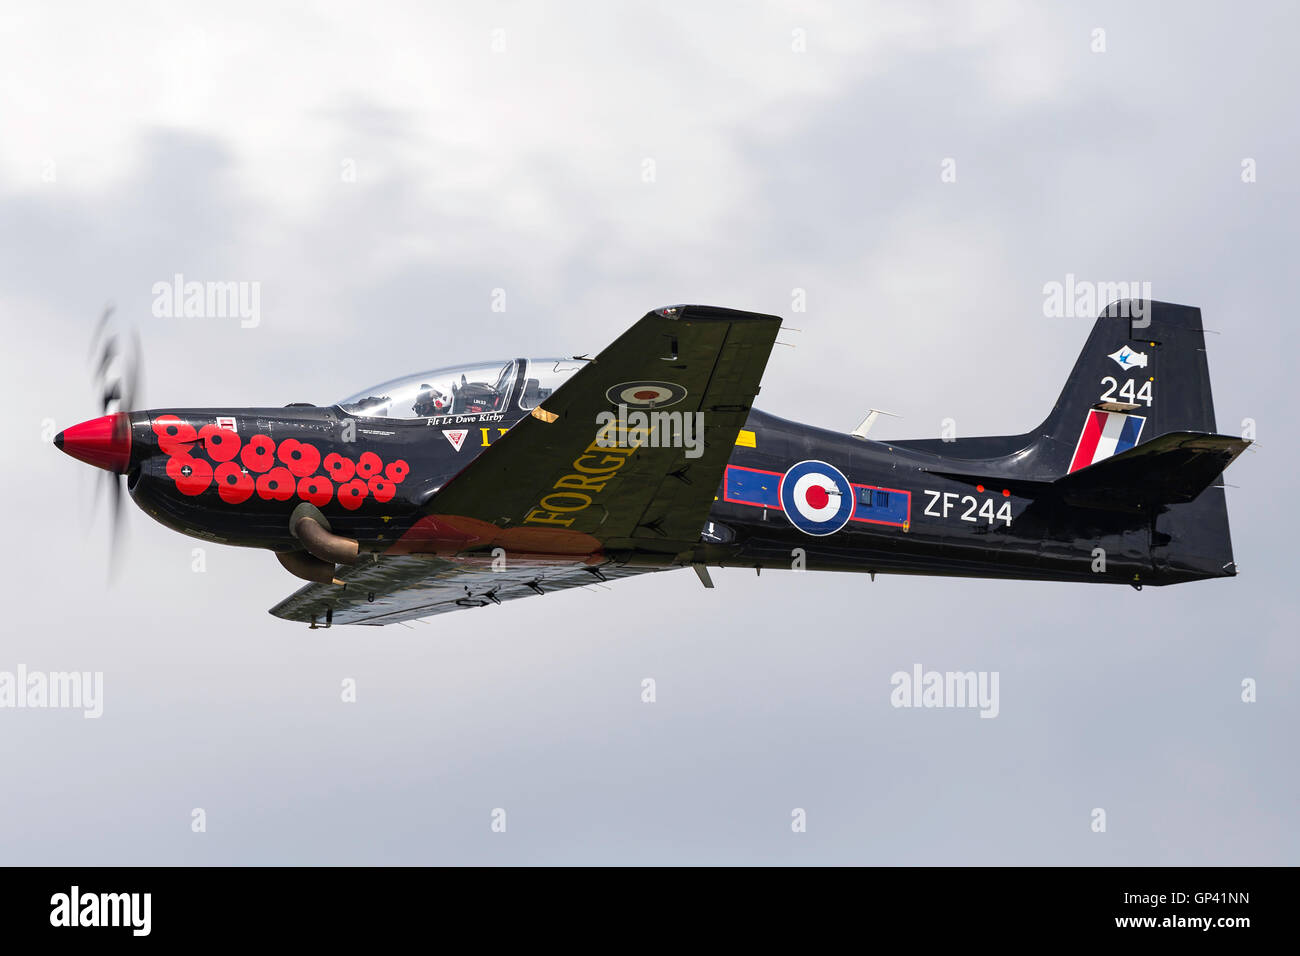 Royal Air Force (RAF) Tucano demonstration aircraft flown by Flt Lt Dave Kirby at the Royal International Air Tattoo (RIAT) Stock Photo